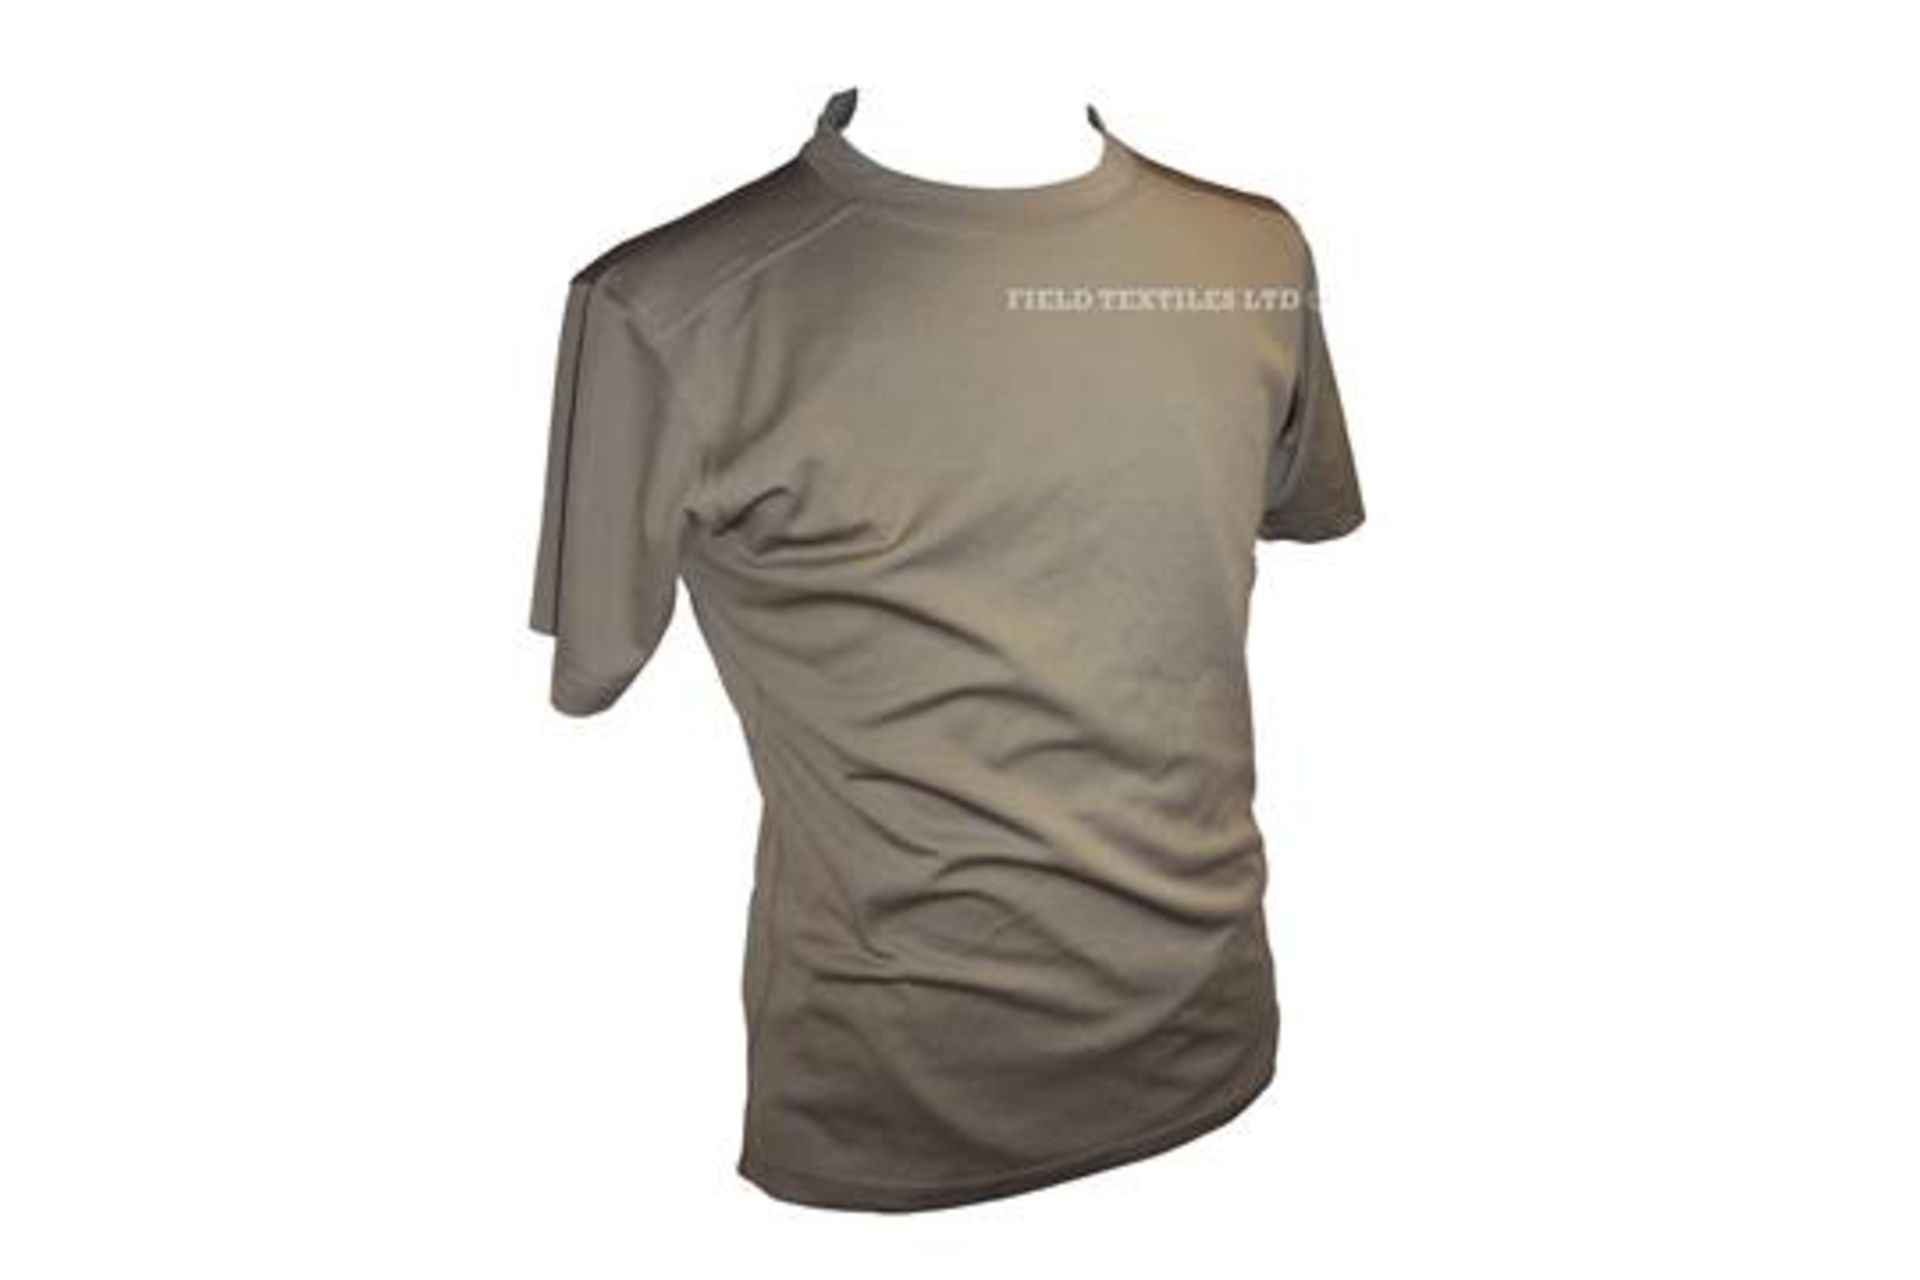 PACK OF 20 MTP SELF WICKING TSHIRTS + PACK OF 20 BROWN SELF WICKING TSHIRTS - GRADE 1 - MIX SIZES